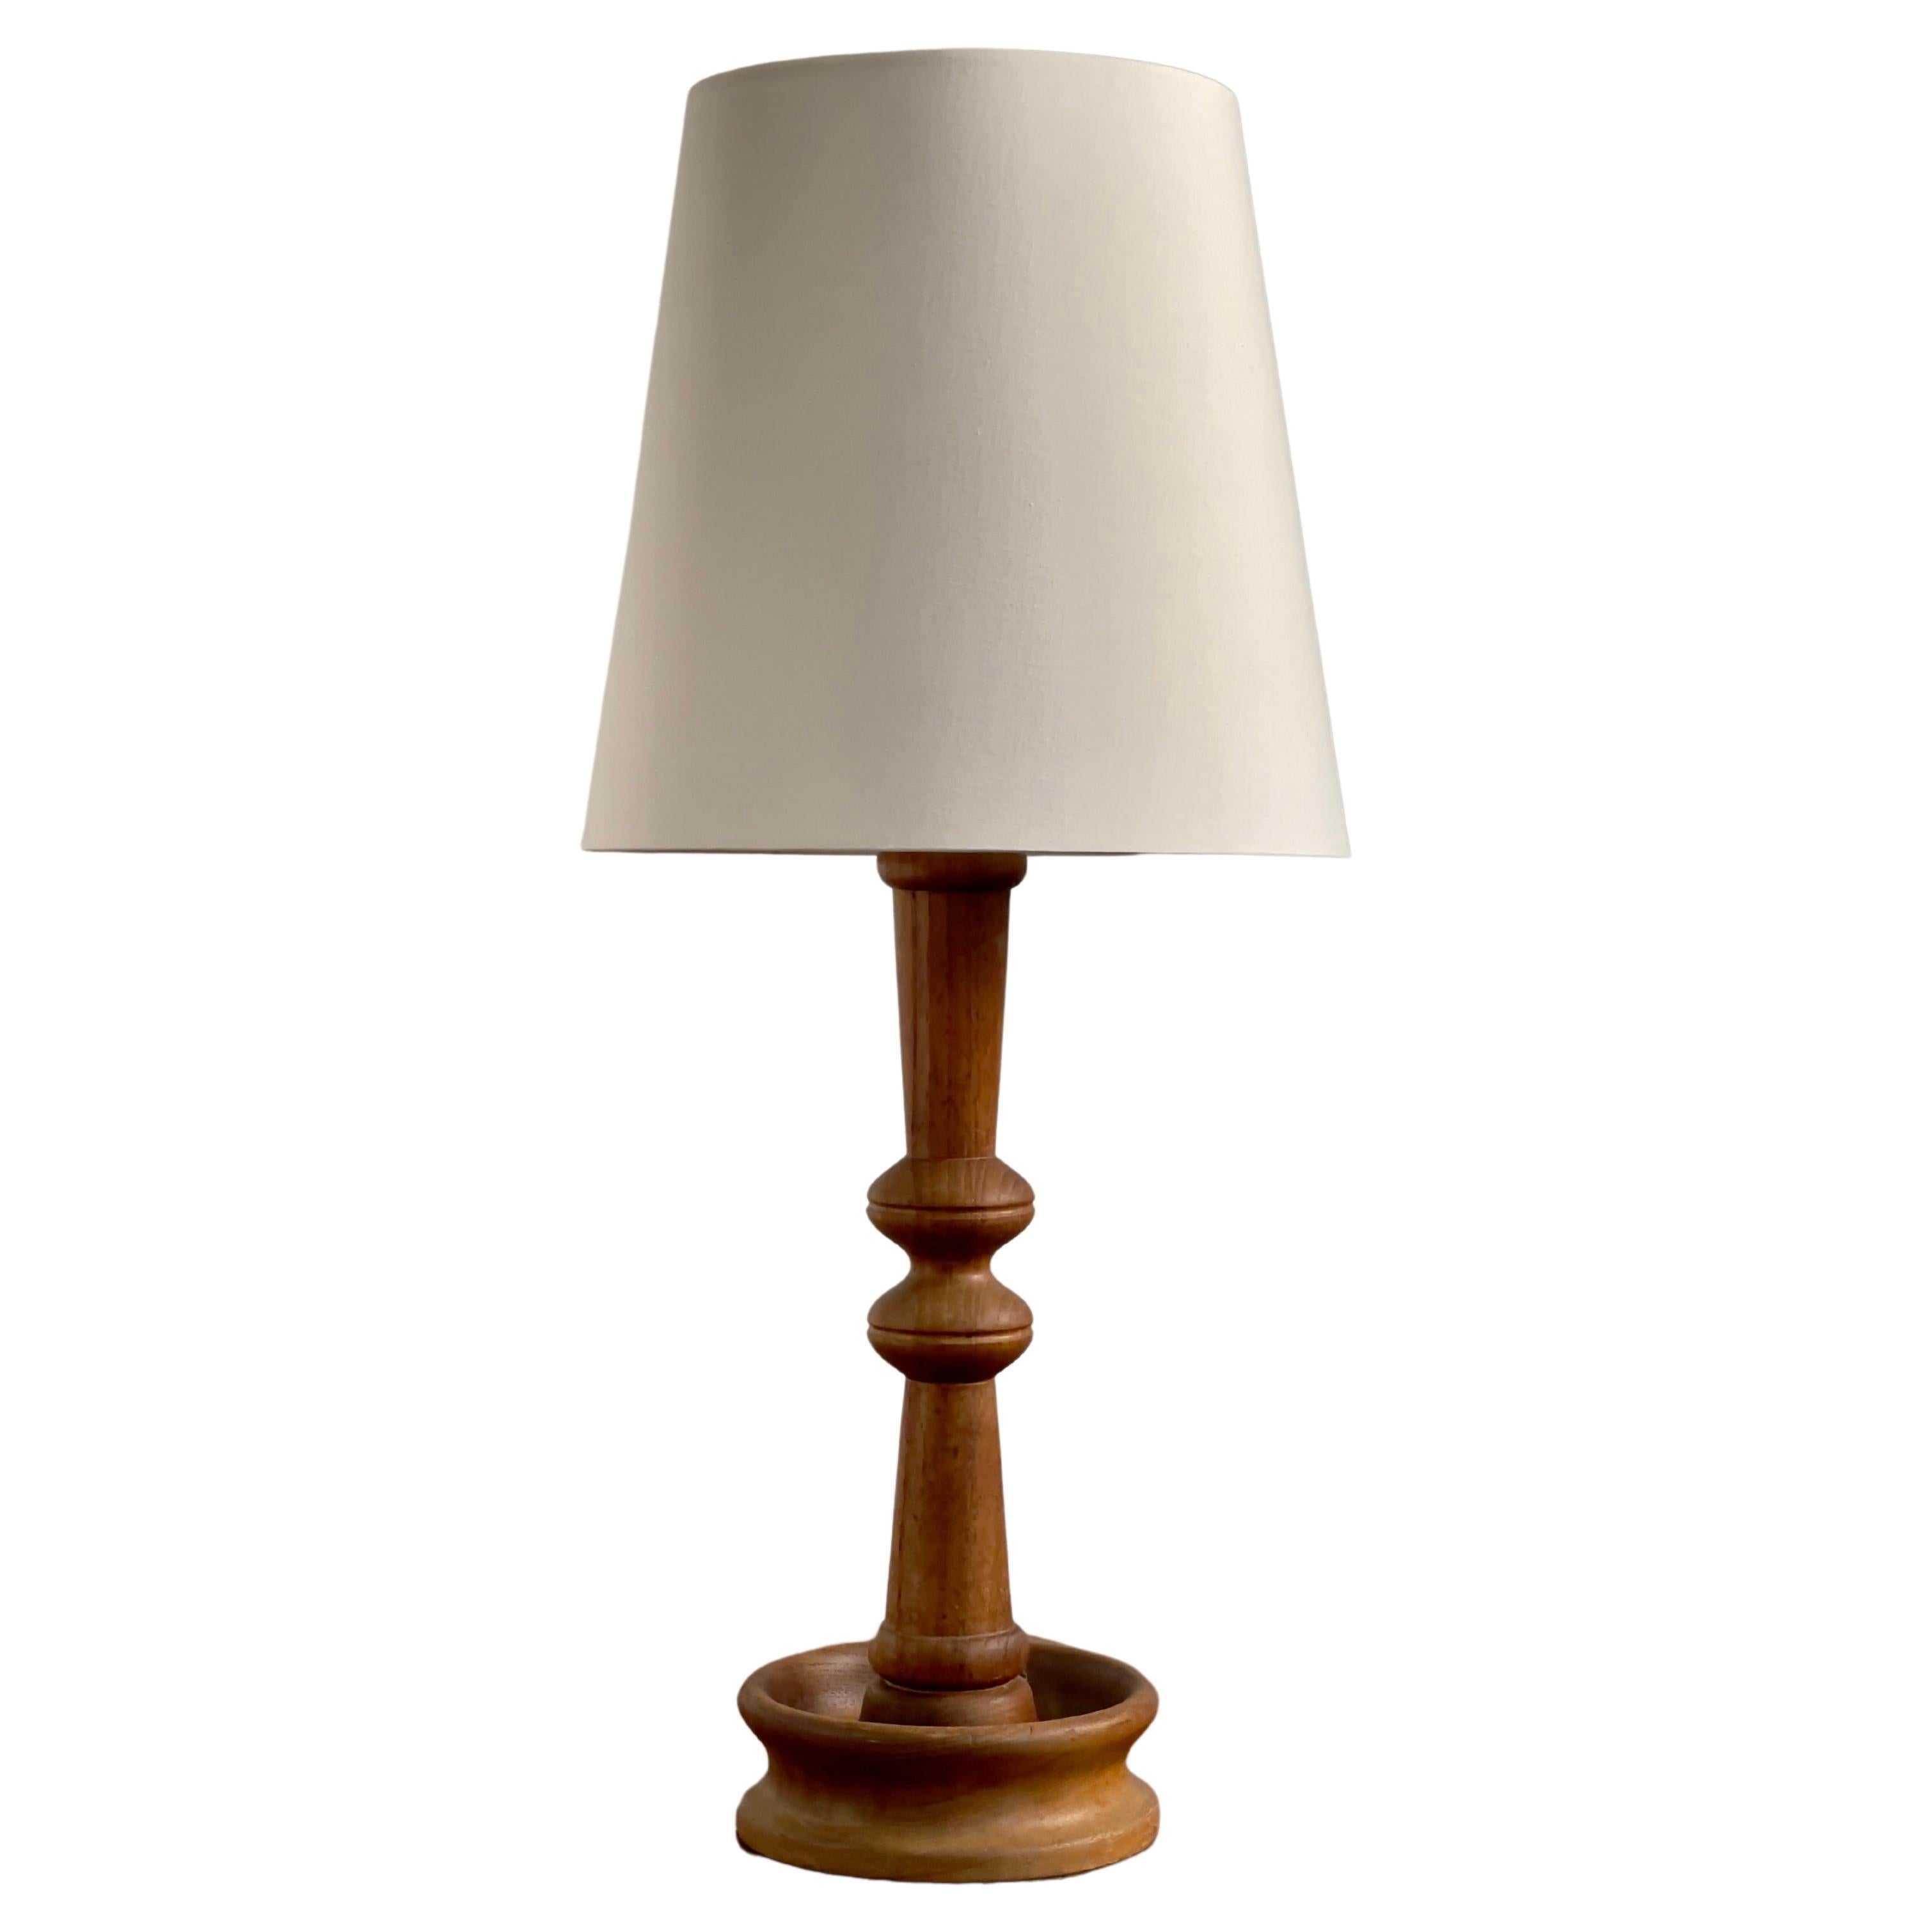 Danish modern table lamp in one solid piece of carved teak wood. Denmark 1950s